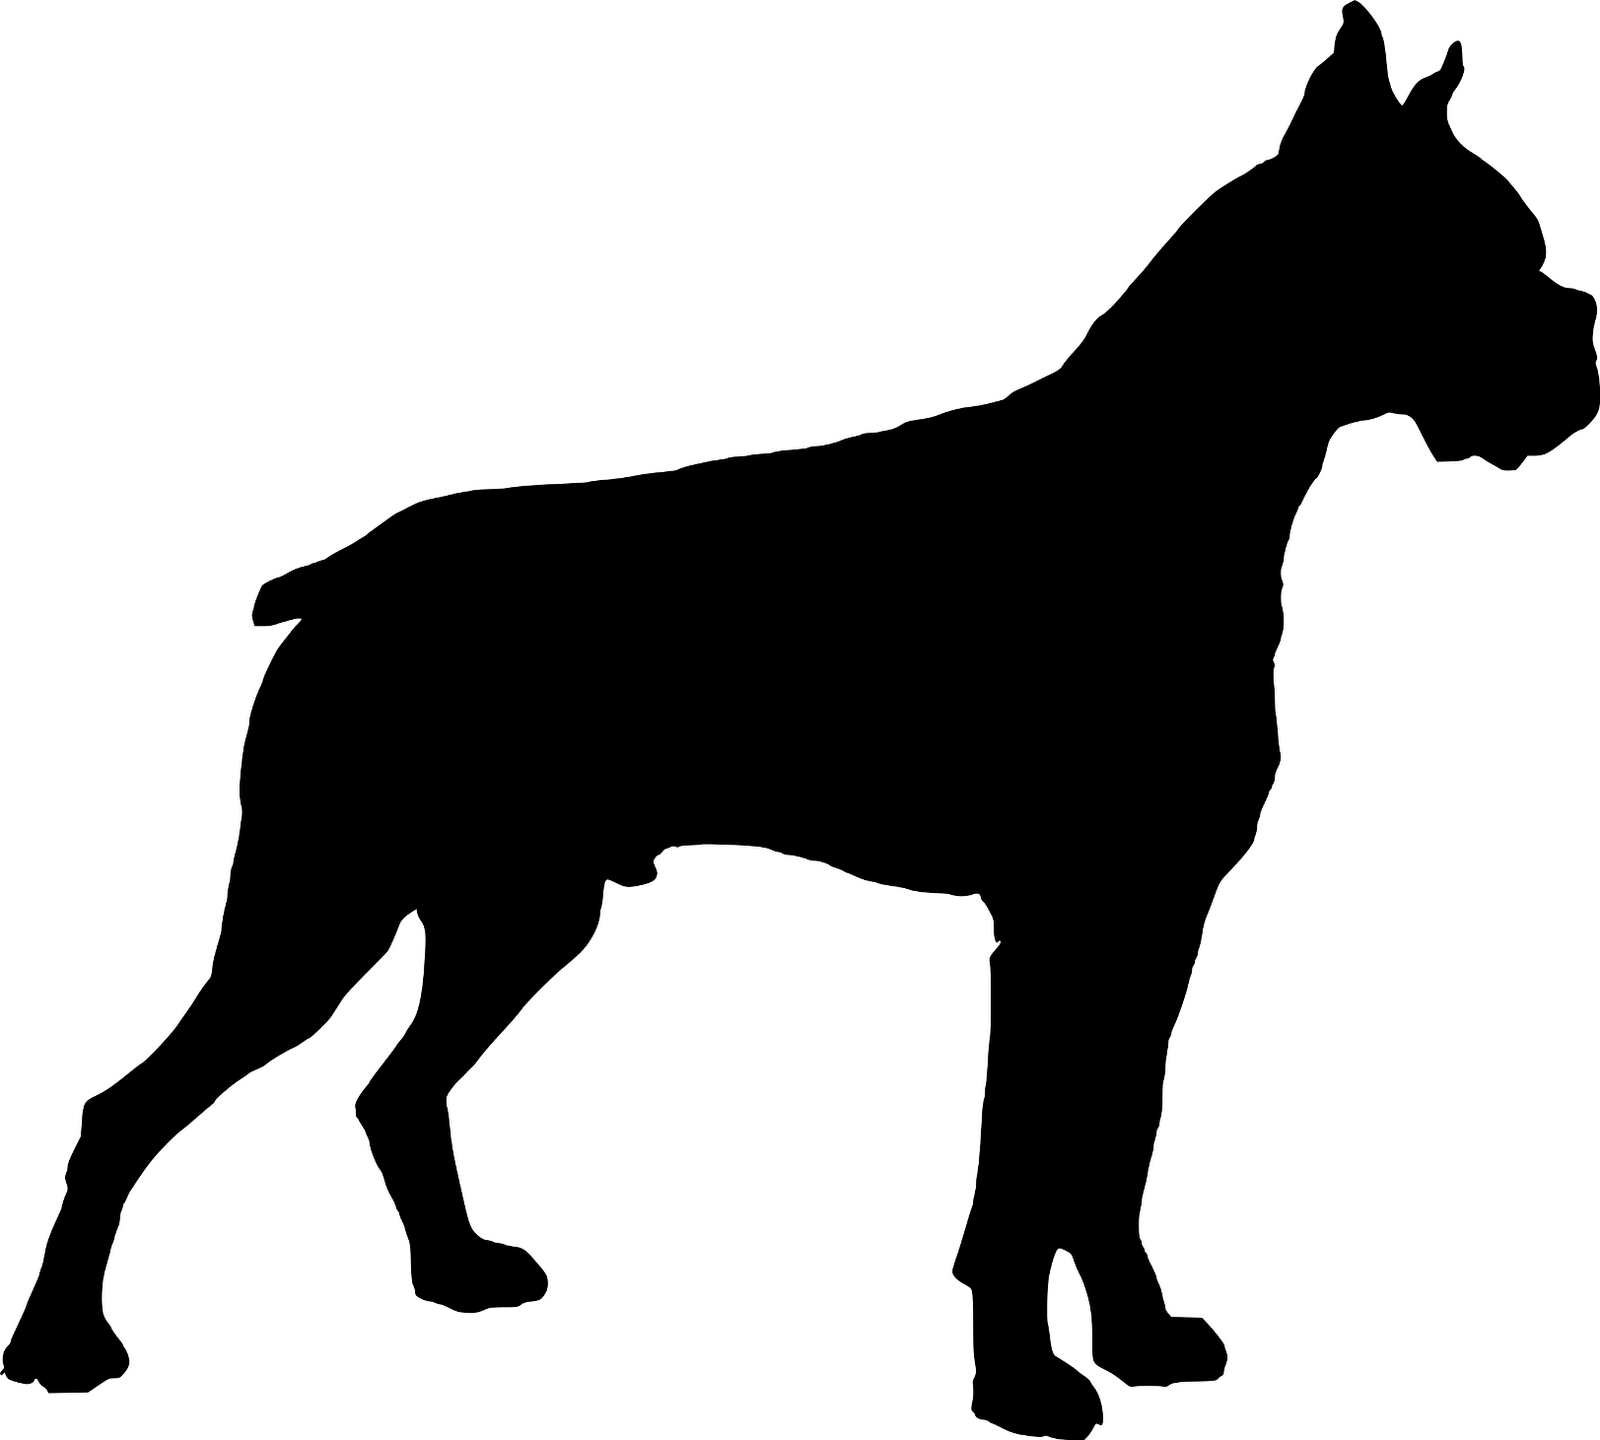 Boxer Dog Silhouette With Words - ClipArt Best